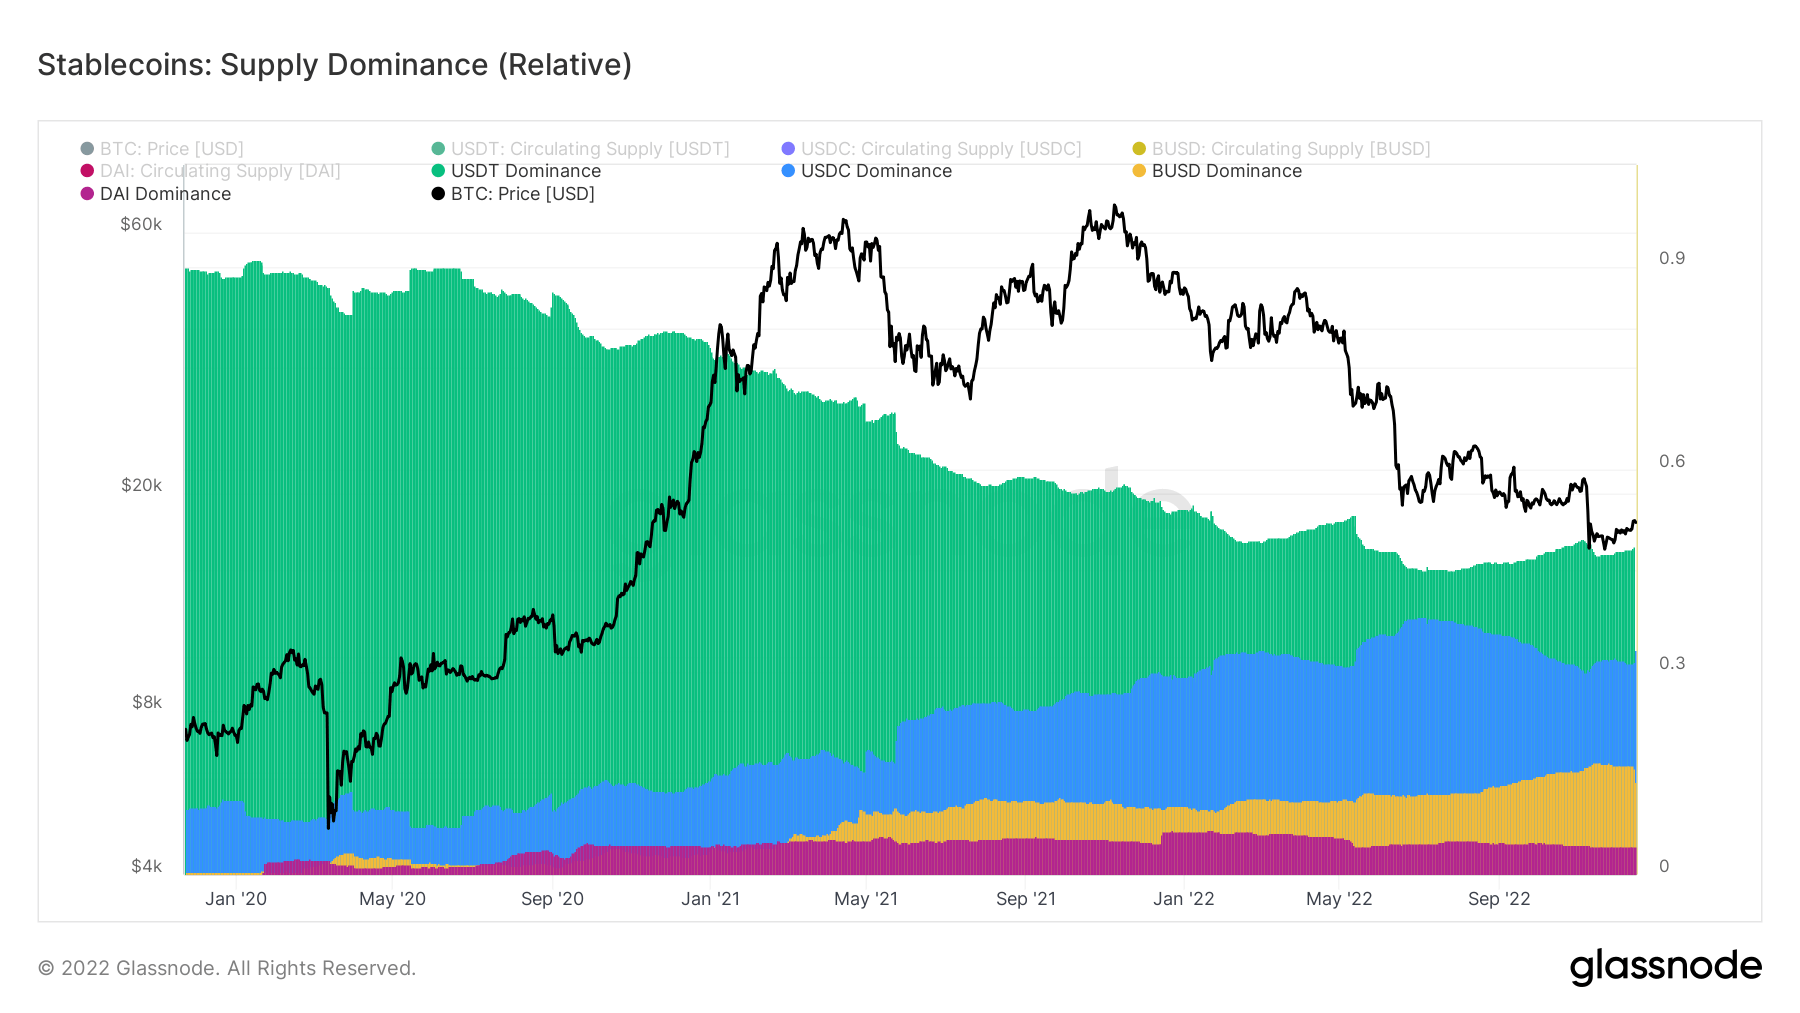 Stablecoins: Supply Dominance (Relative)